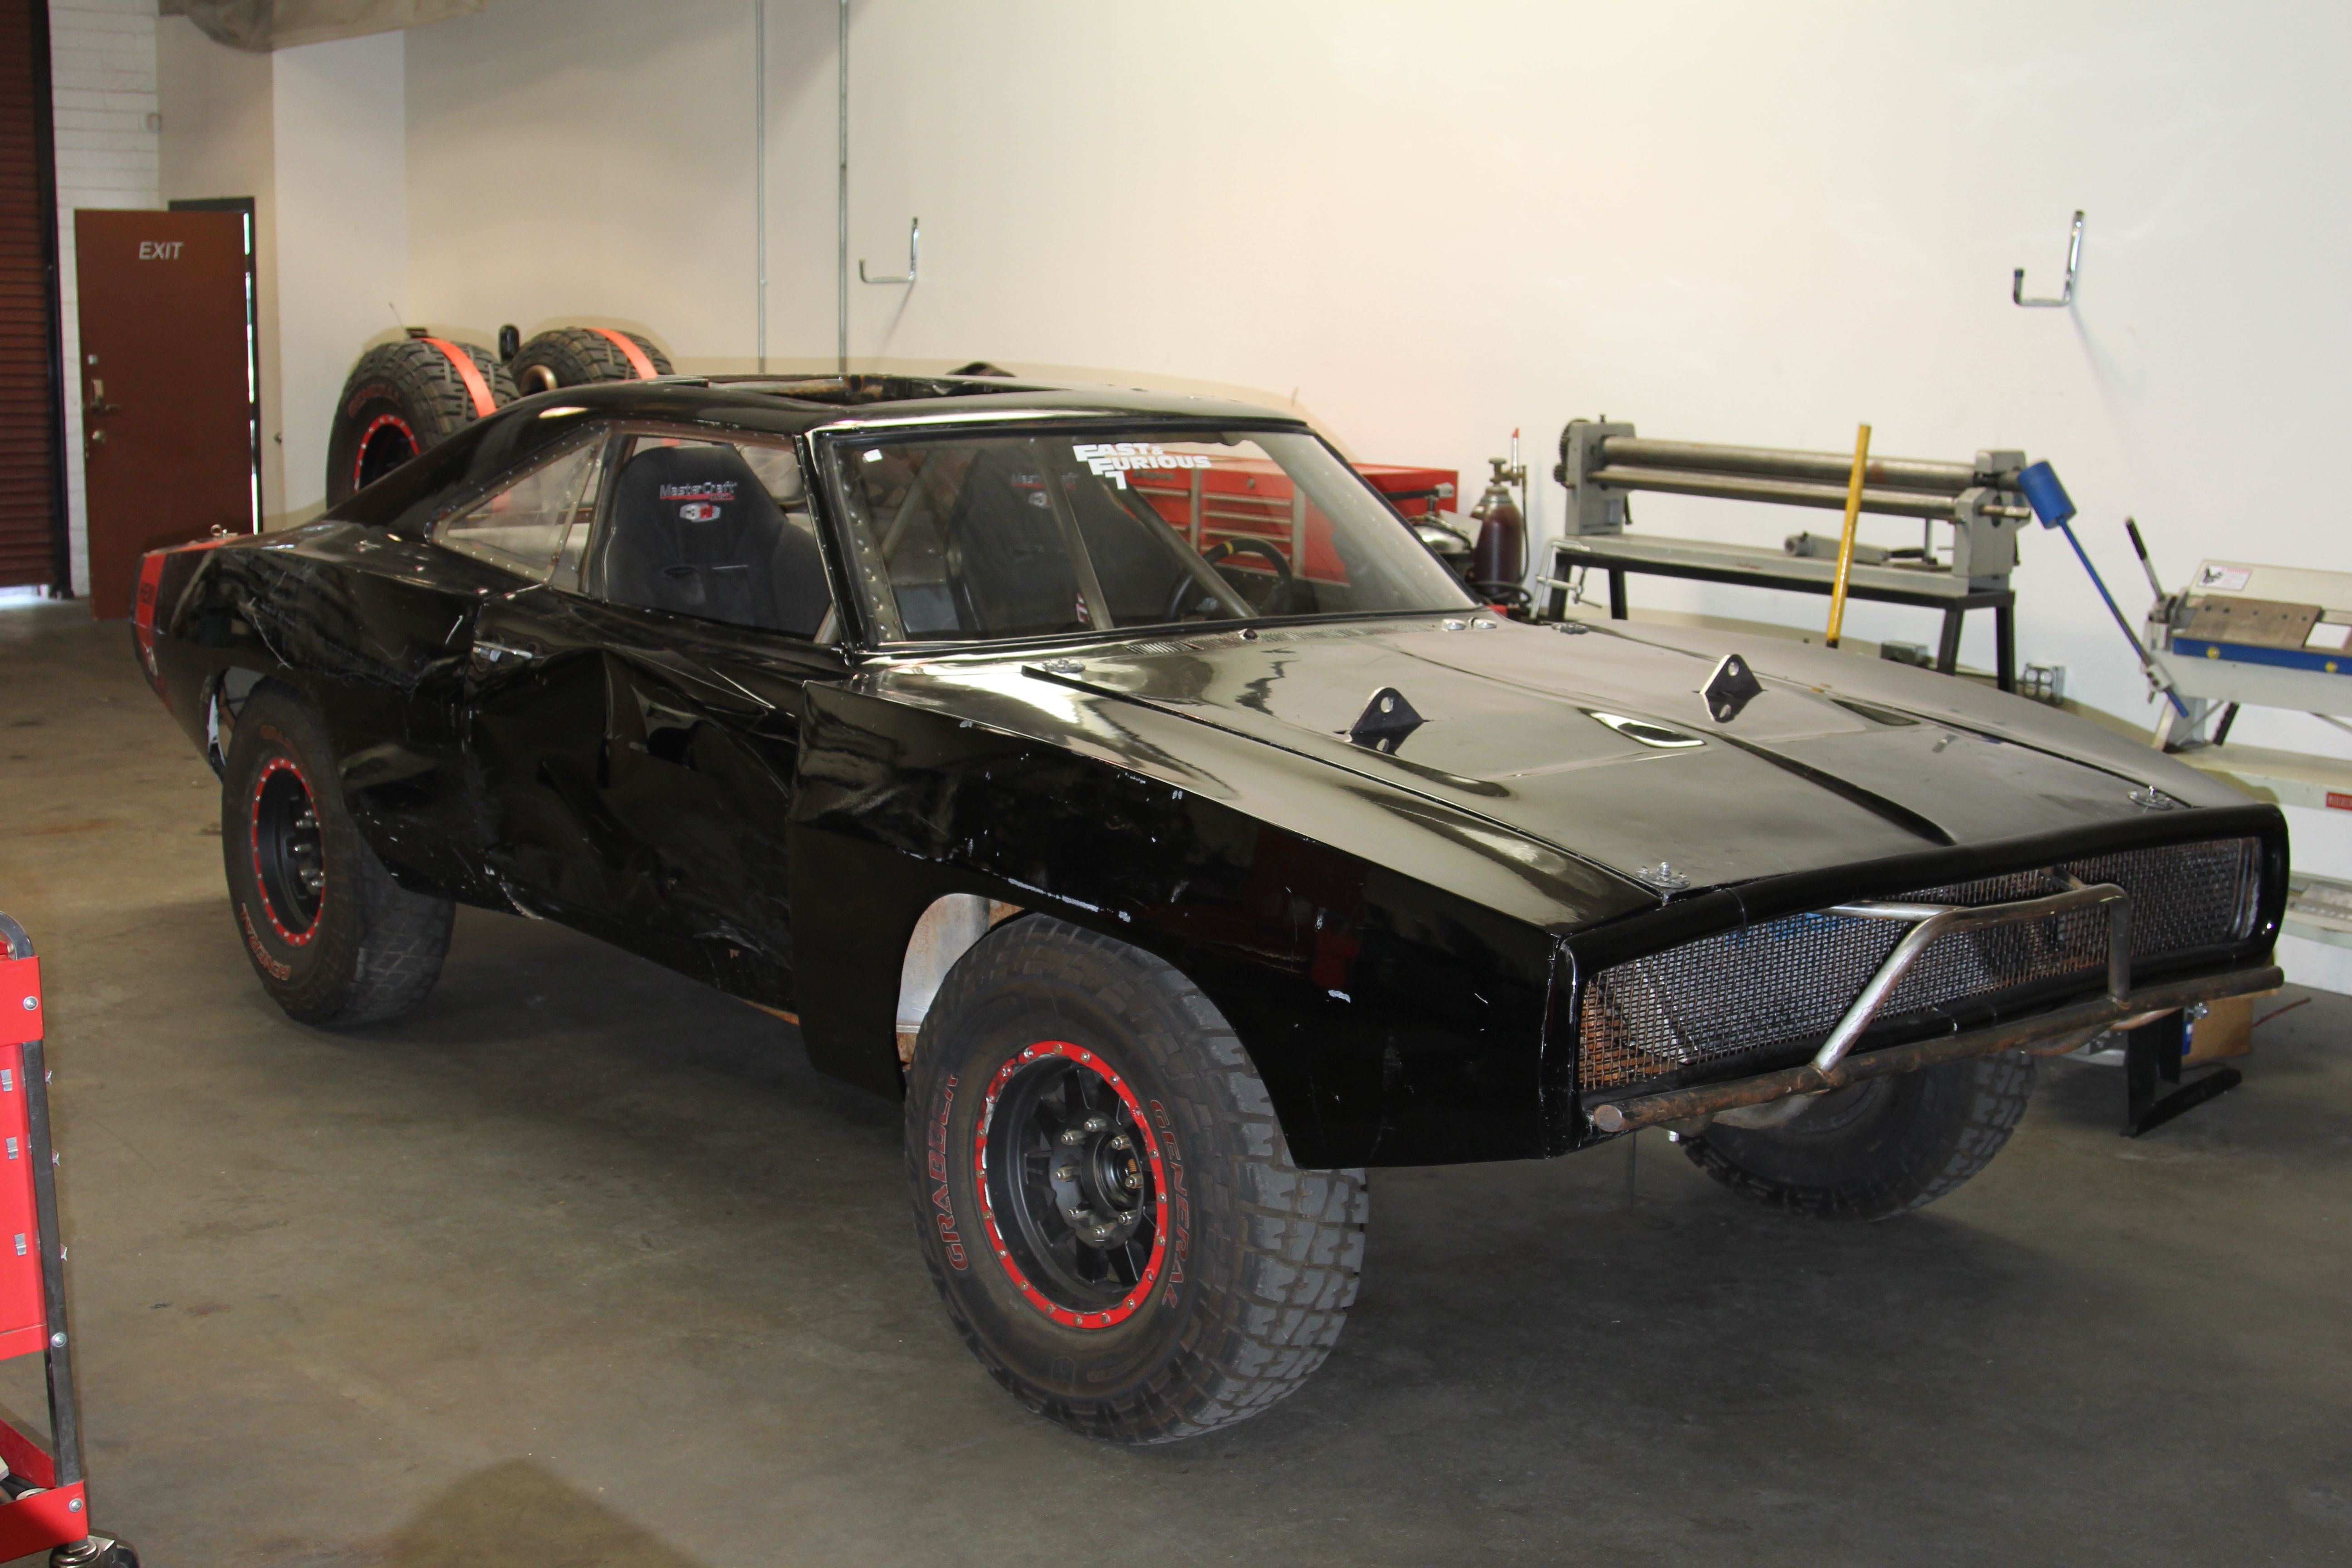 1970 Dodge Charger Rt Off Road Fast And Furious 7 Movie